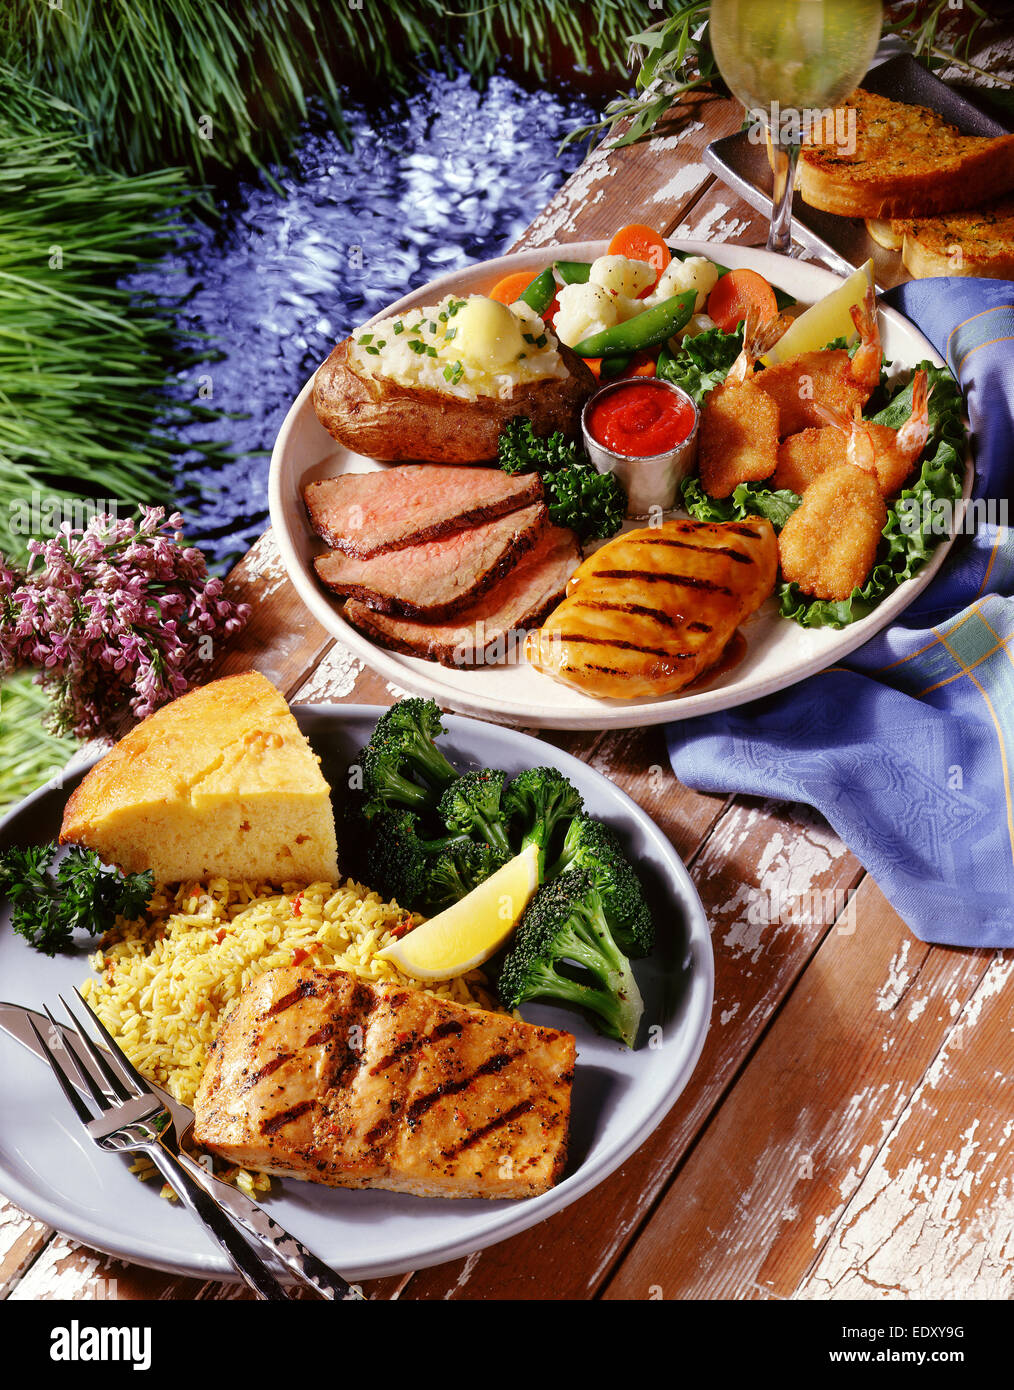 Salmon and beef dinners Stock Photo